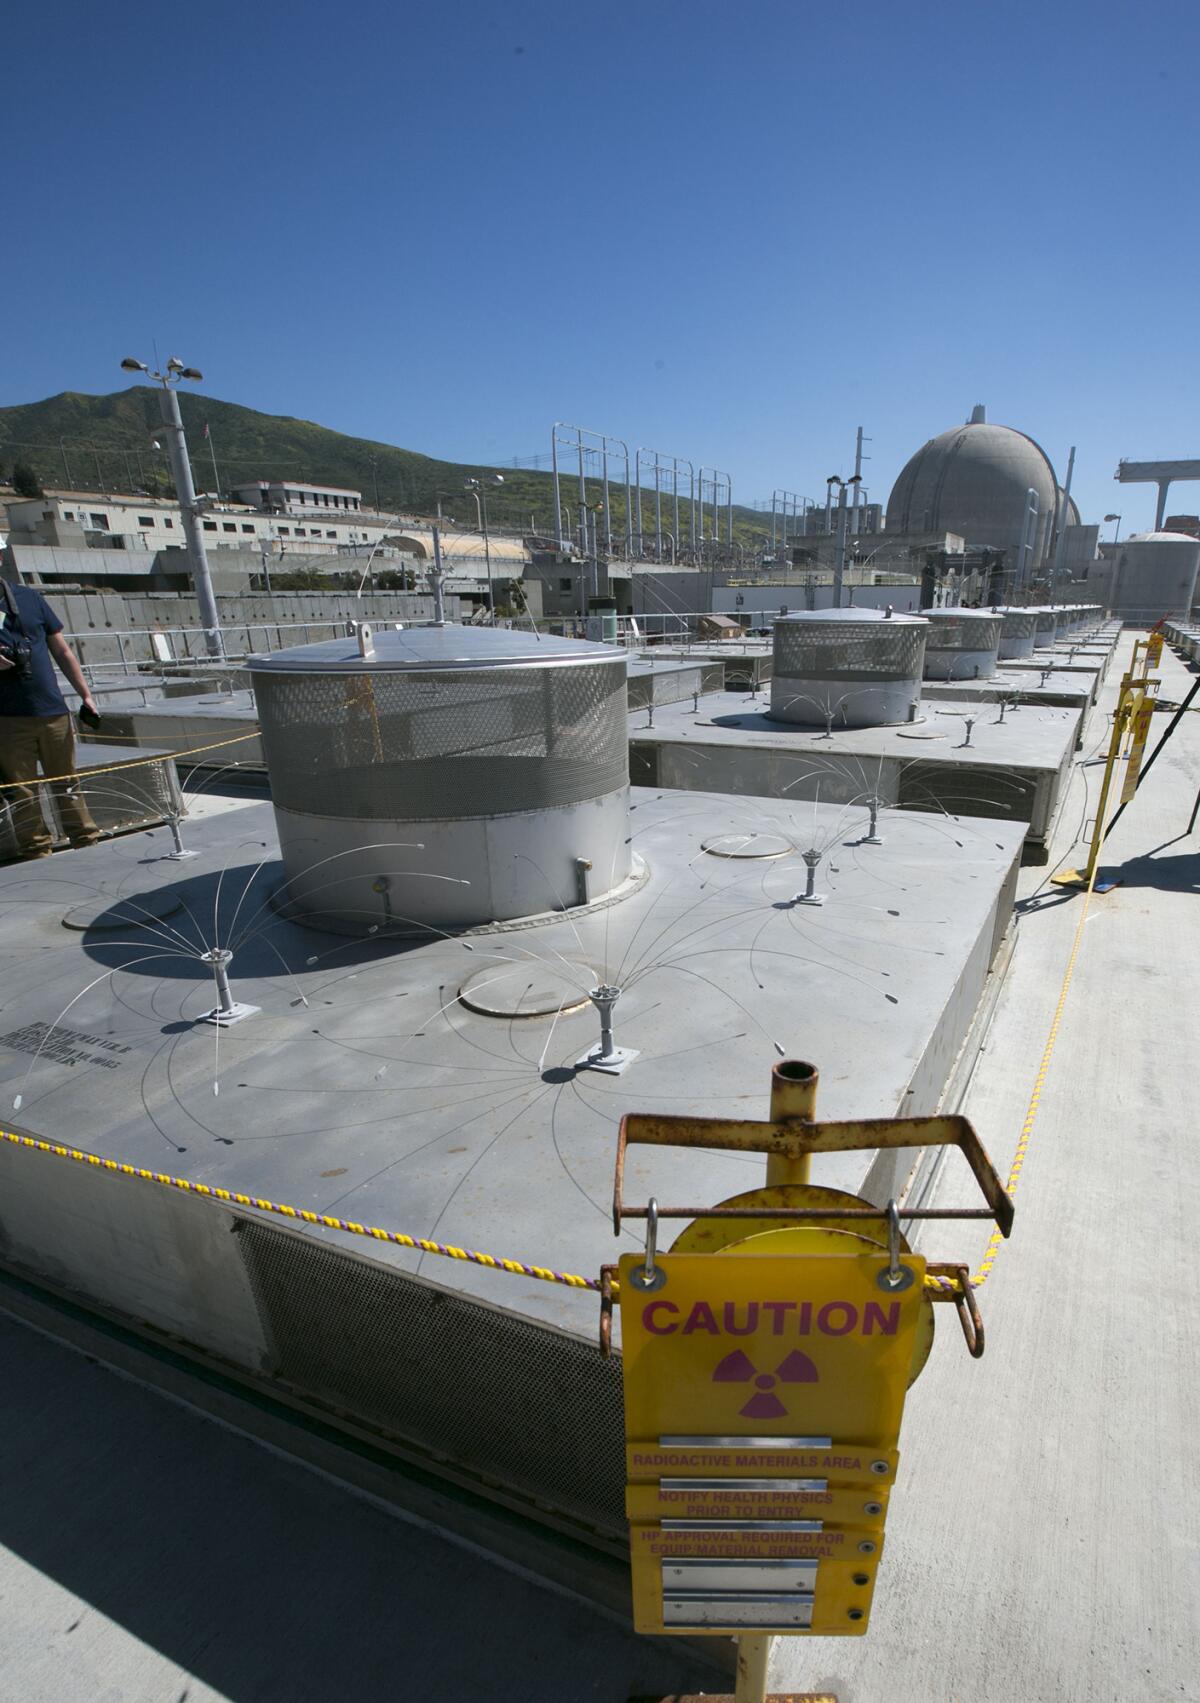 One of the enclosures at the Independent Spent Fuel Storage Installation at the San Onofre Nuclear Generating Station, where canisters containing spent nuclear fuel are lowered.